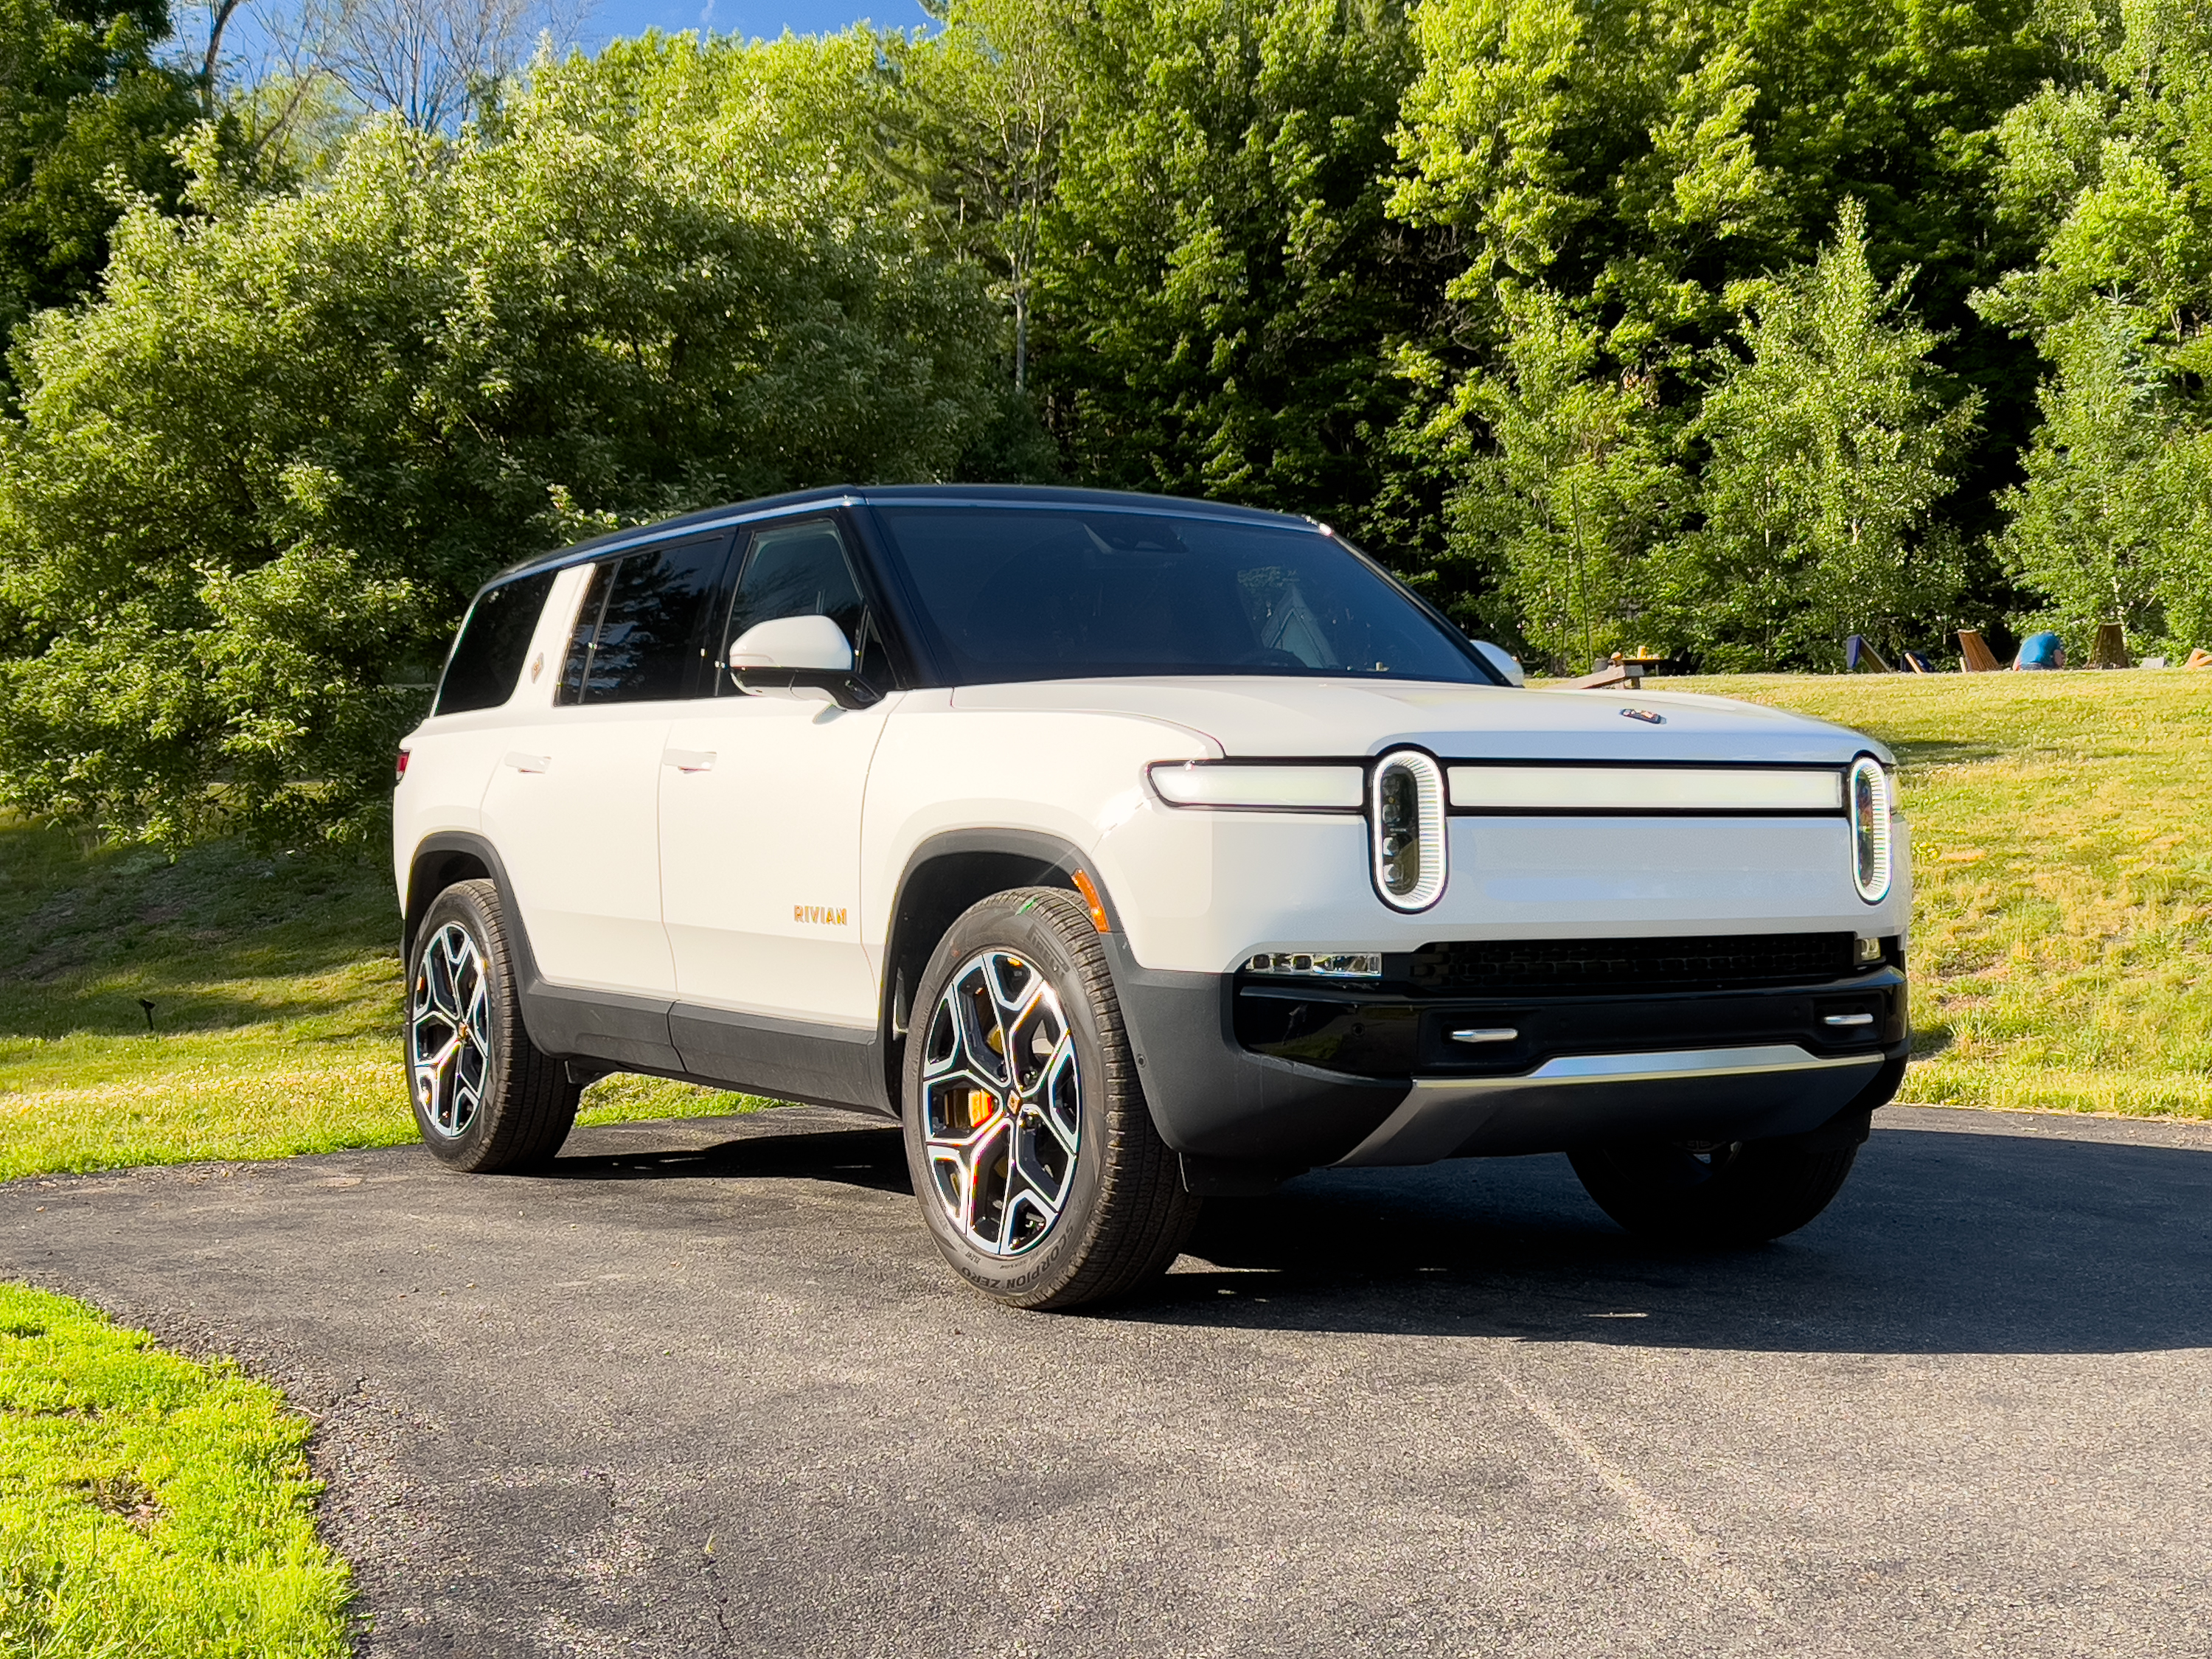 Rivian R1S: An All-Electric SUV with Three Battery Options, Off-Road Capabilities & Praiseworthy Reviews